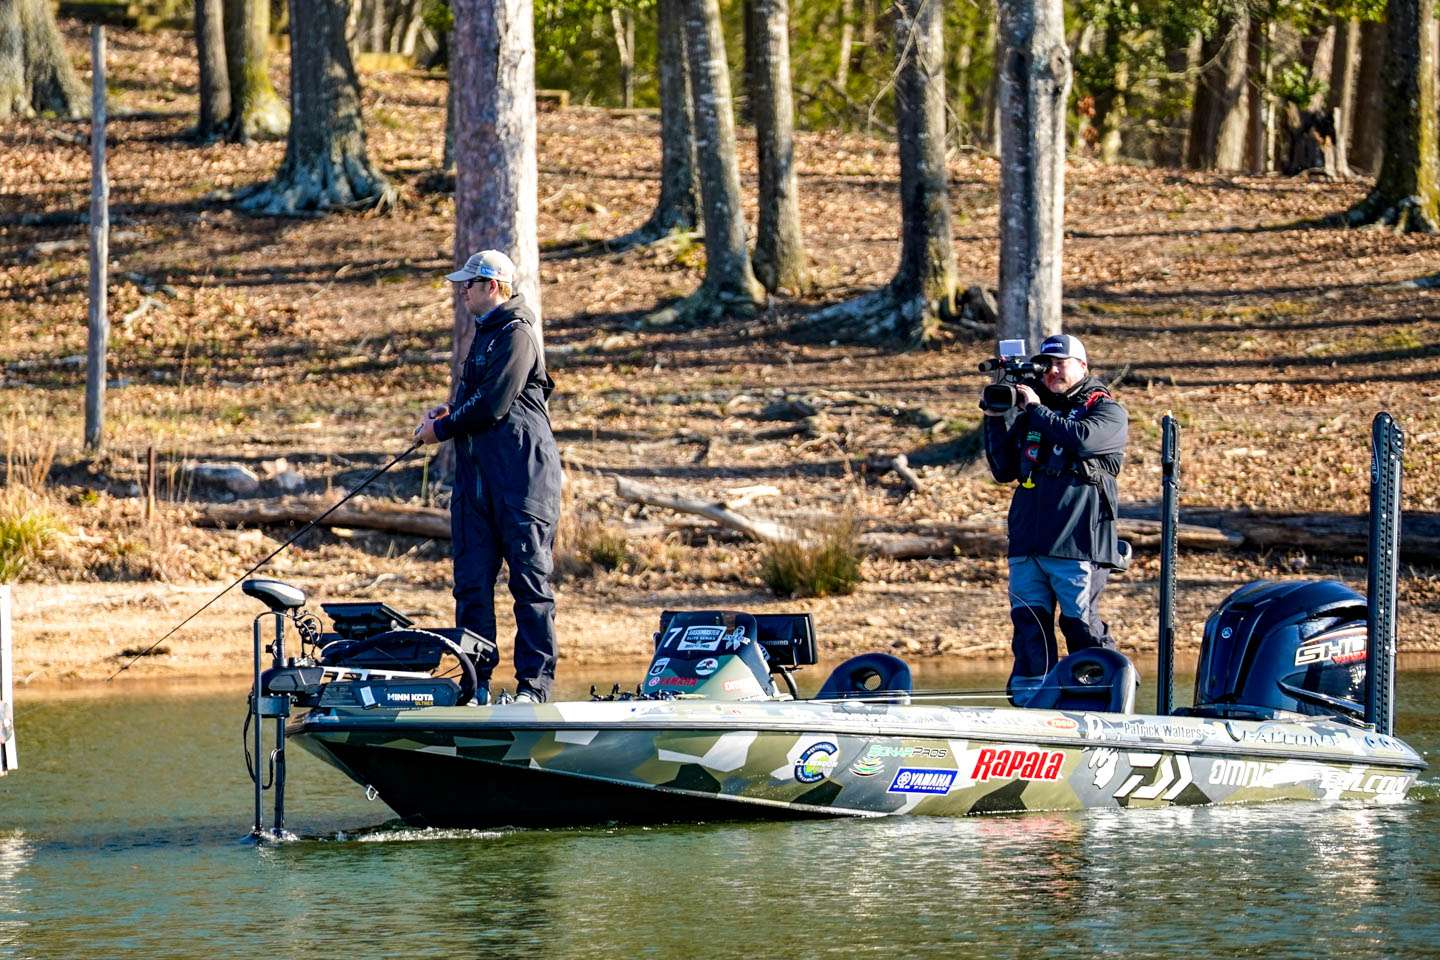 Walters told me at takeoff that he was definitely going to mix in some dock fishing as well. Keeping an open mind, the South Carolina native fished a stretch of docks mid-morning. 